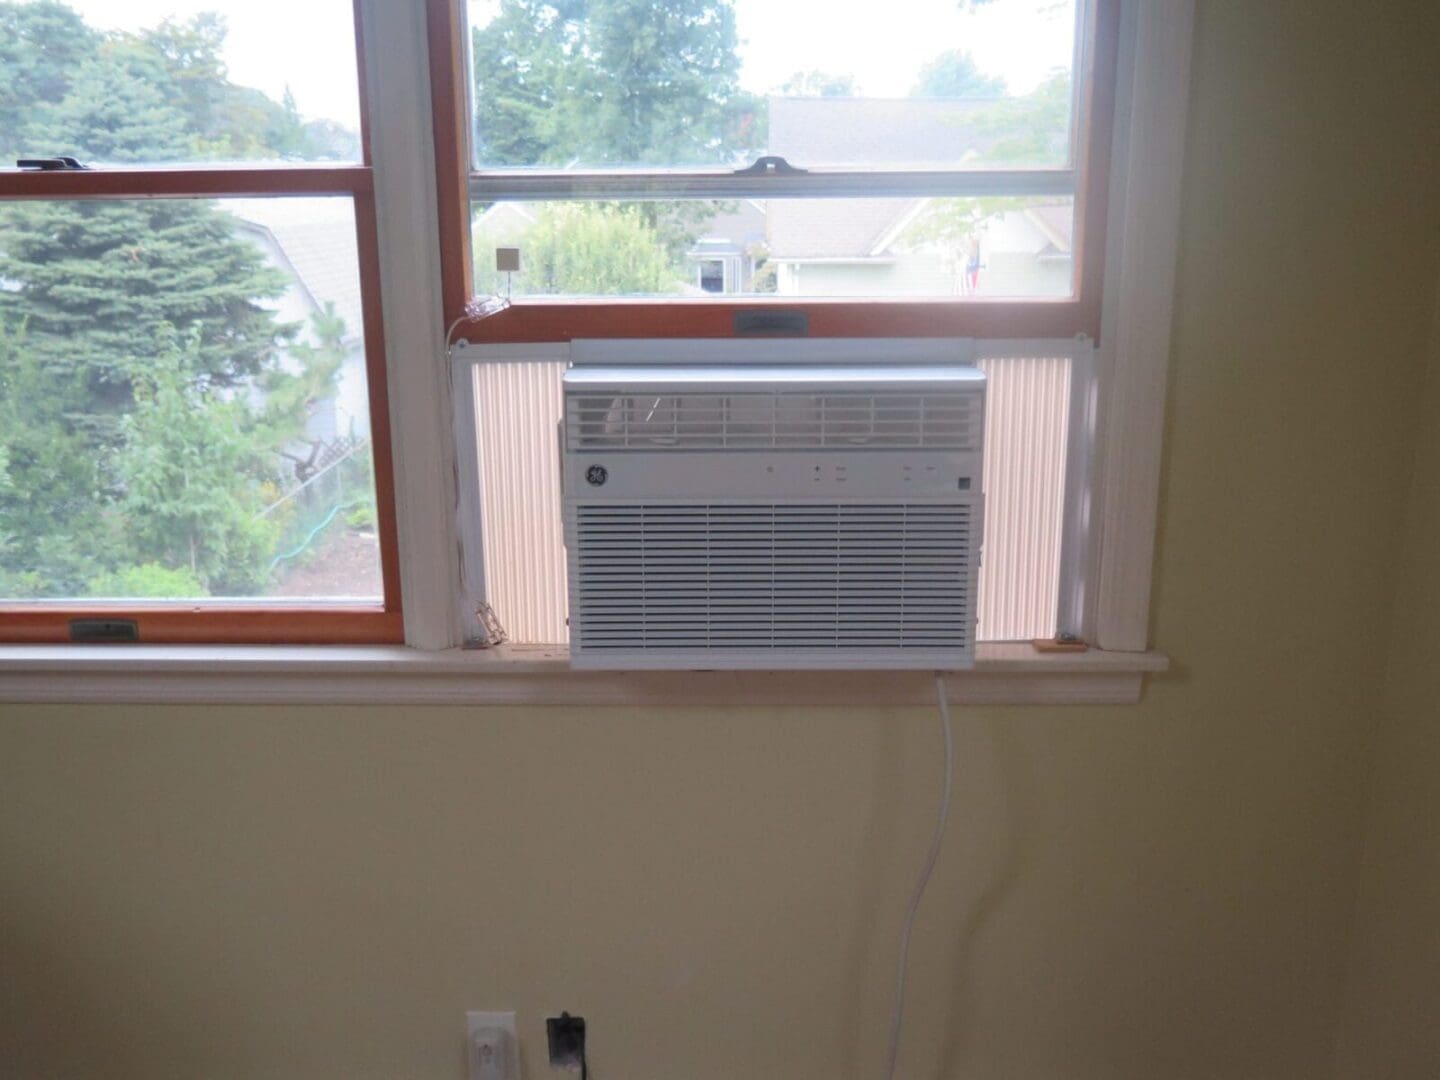 An air conditioner sitting on a window sill.